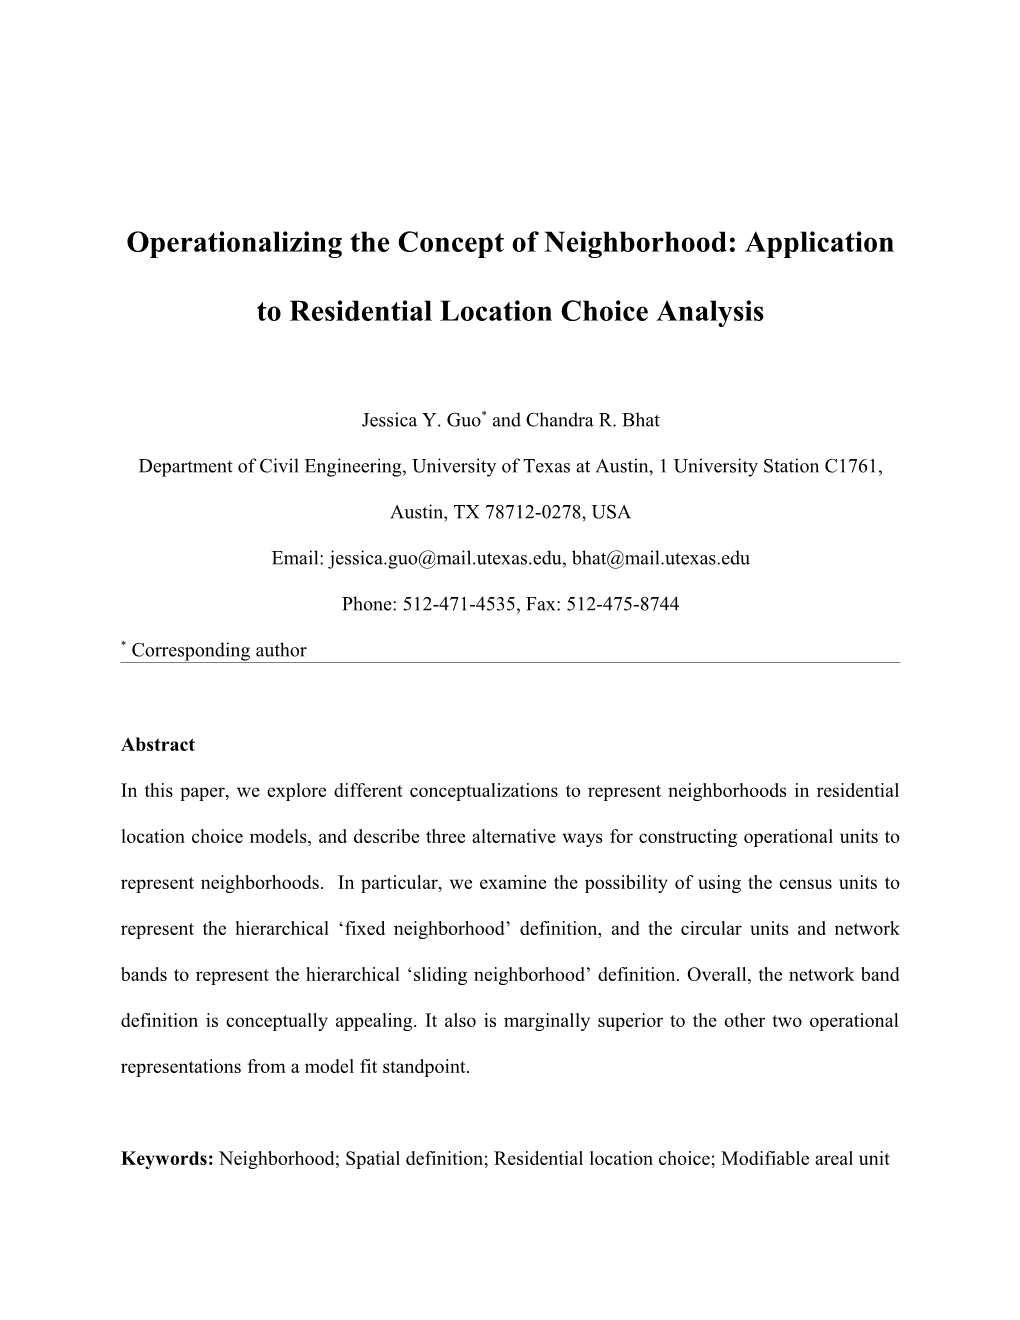 Hierarchical Representation of Neighborhoods in Residential Location Choice Modeling